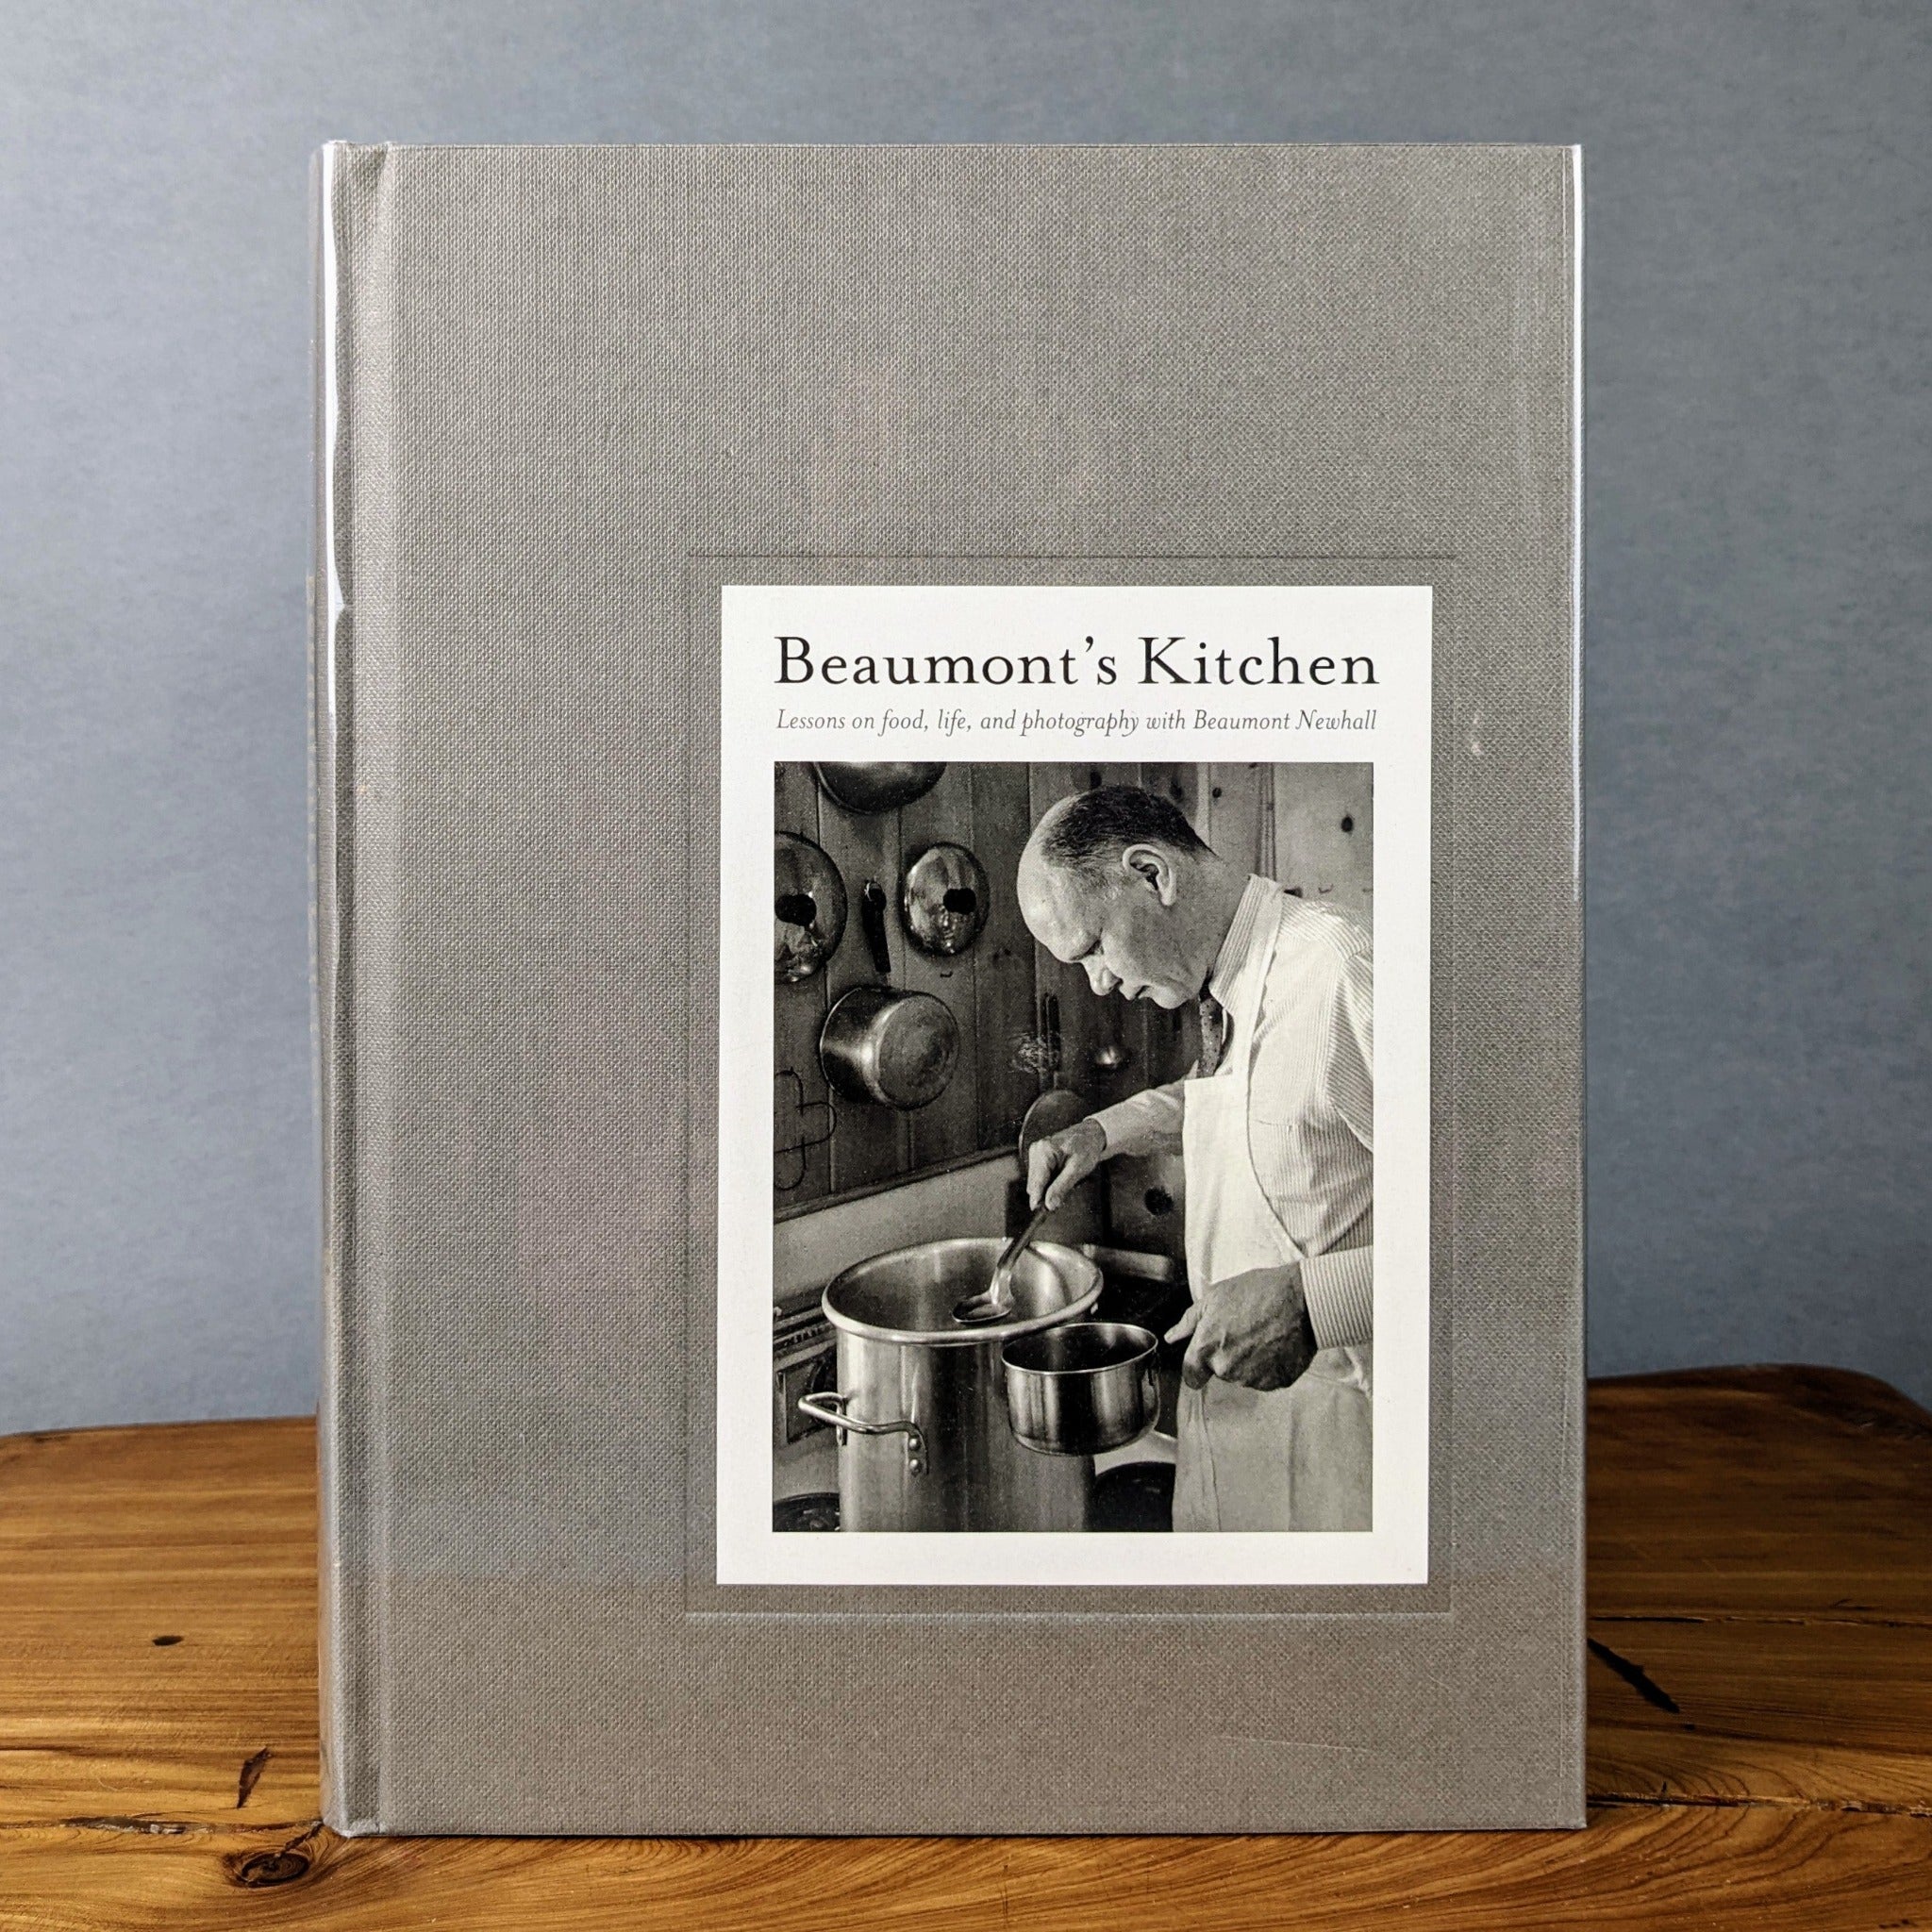 Beaumont's Kitchen: Lessons on Food, Life and Photography with Beaumont Newhall - Los Poblanos Farm Shop